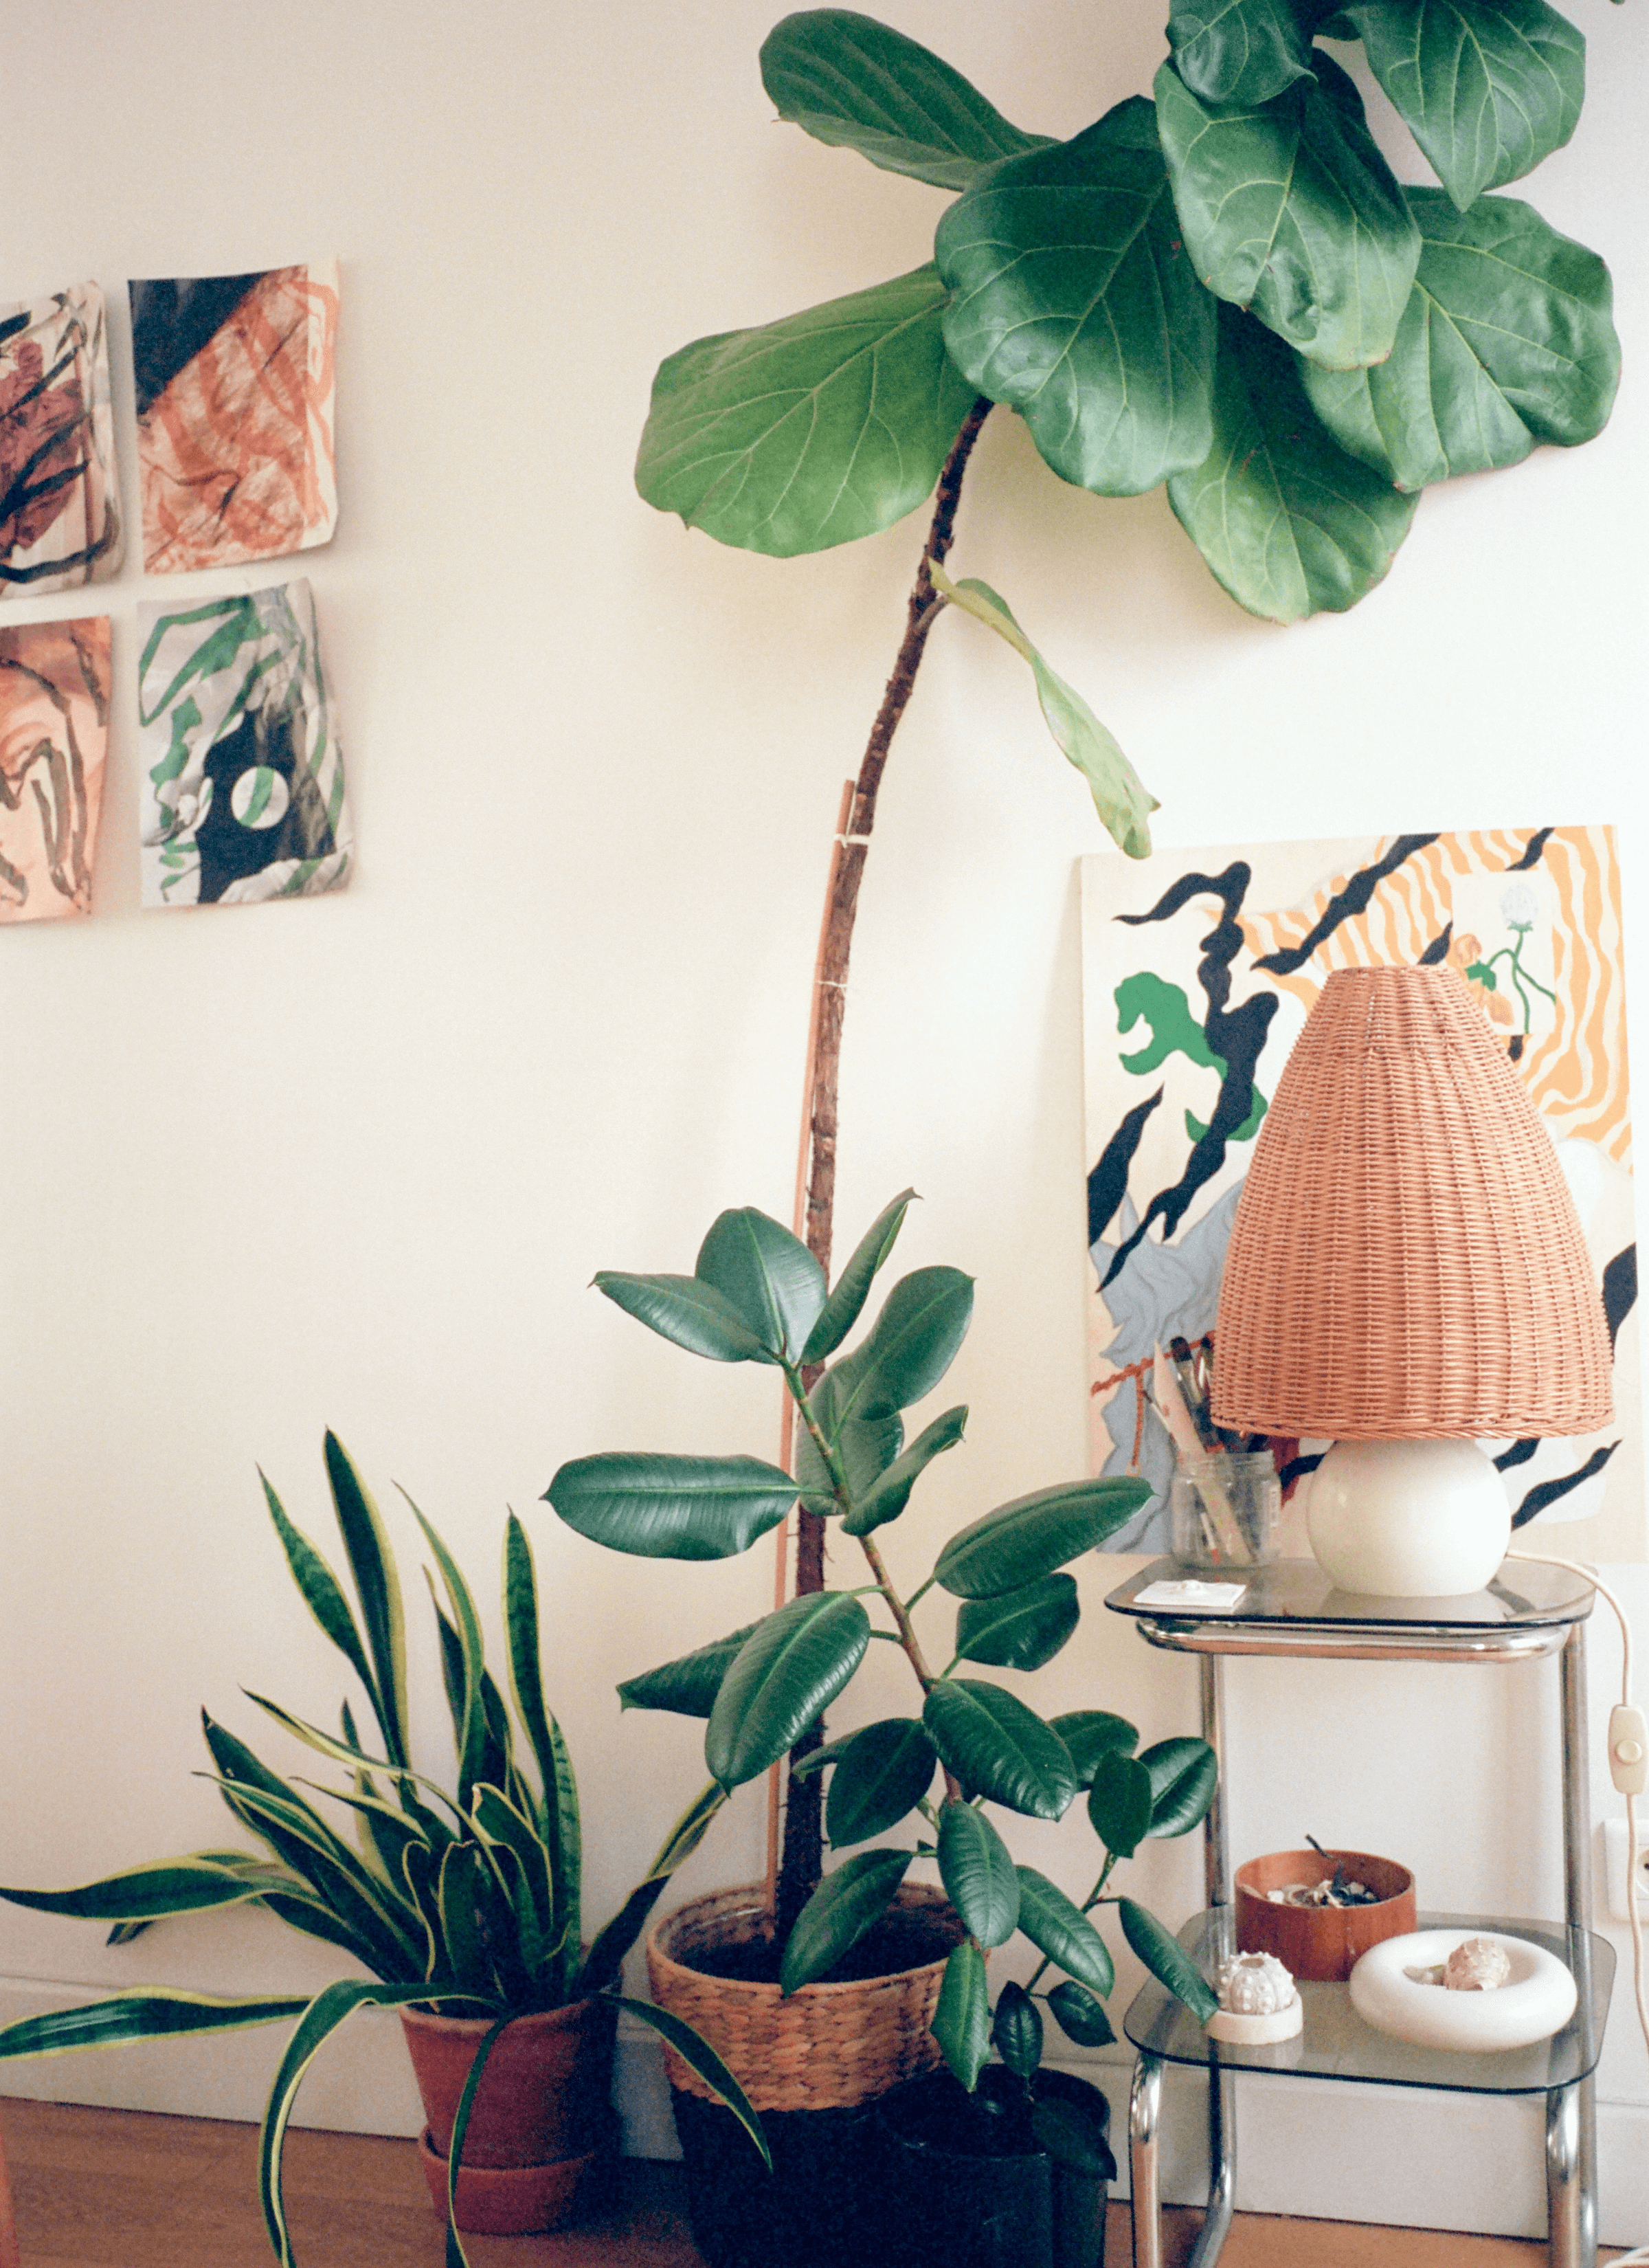 Potted plants - fiddle-leaf fig, rubber fig and snake plant next to the wall where hung a few pieces of art. And a small lamp on a two-layer table.